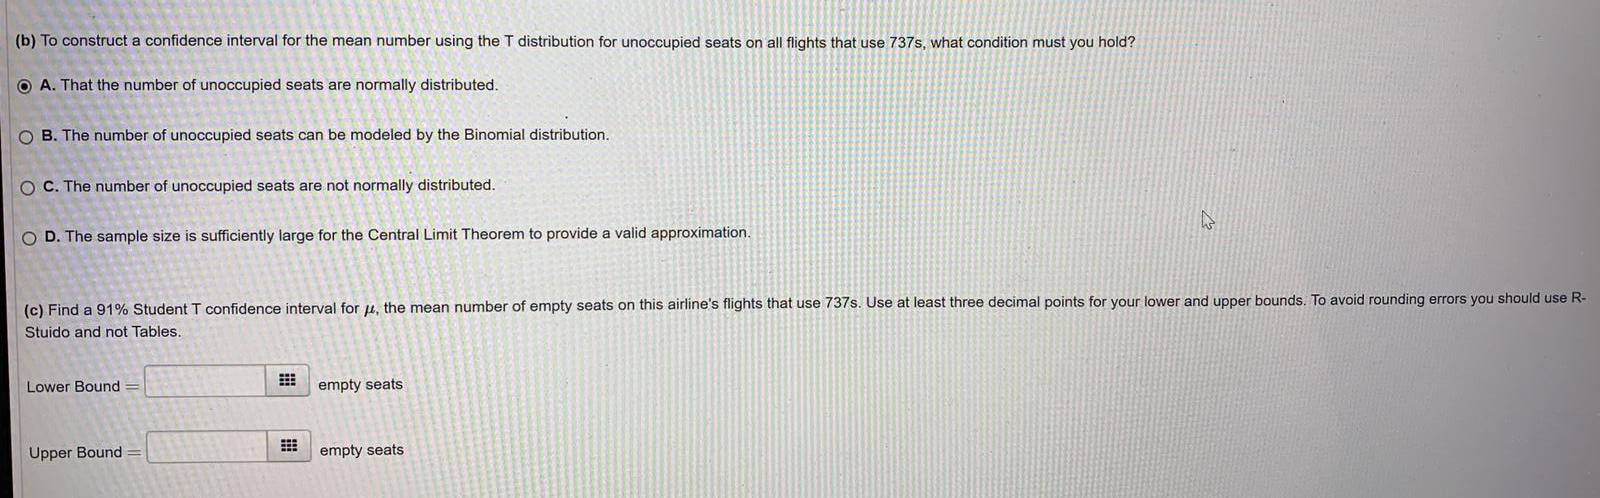 (b) To construct a confidence interval for the mean number using the T distribution for unoccupied seats on all 737s, what co